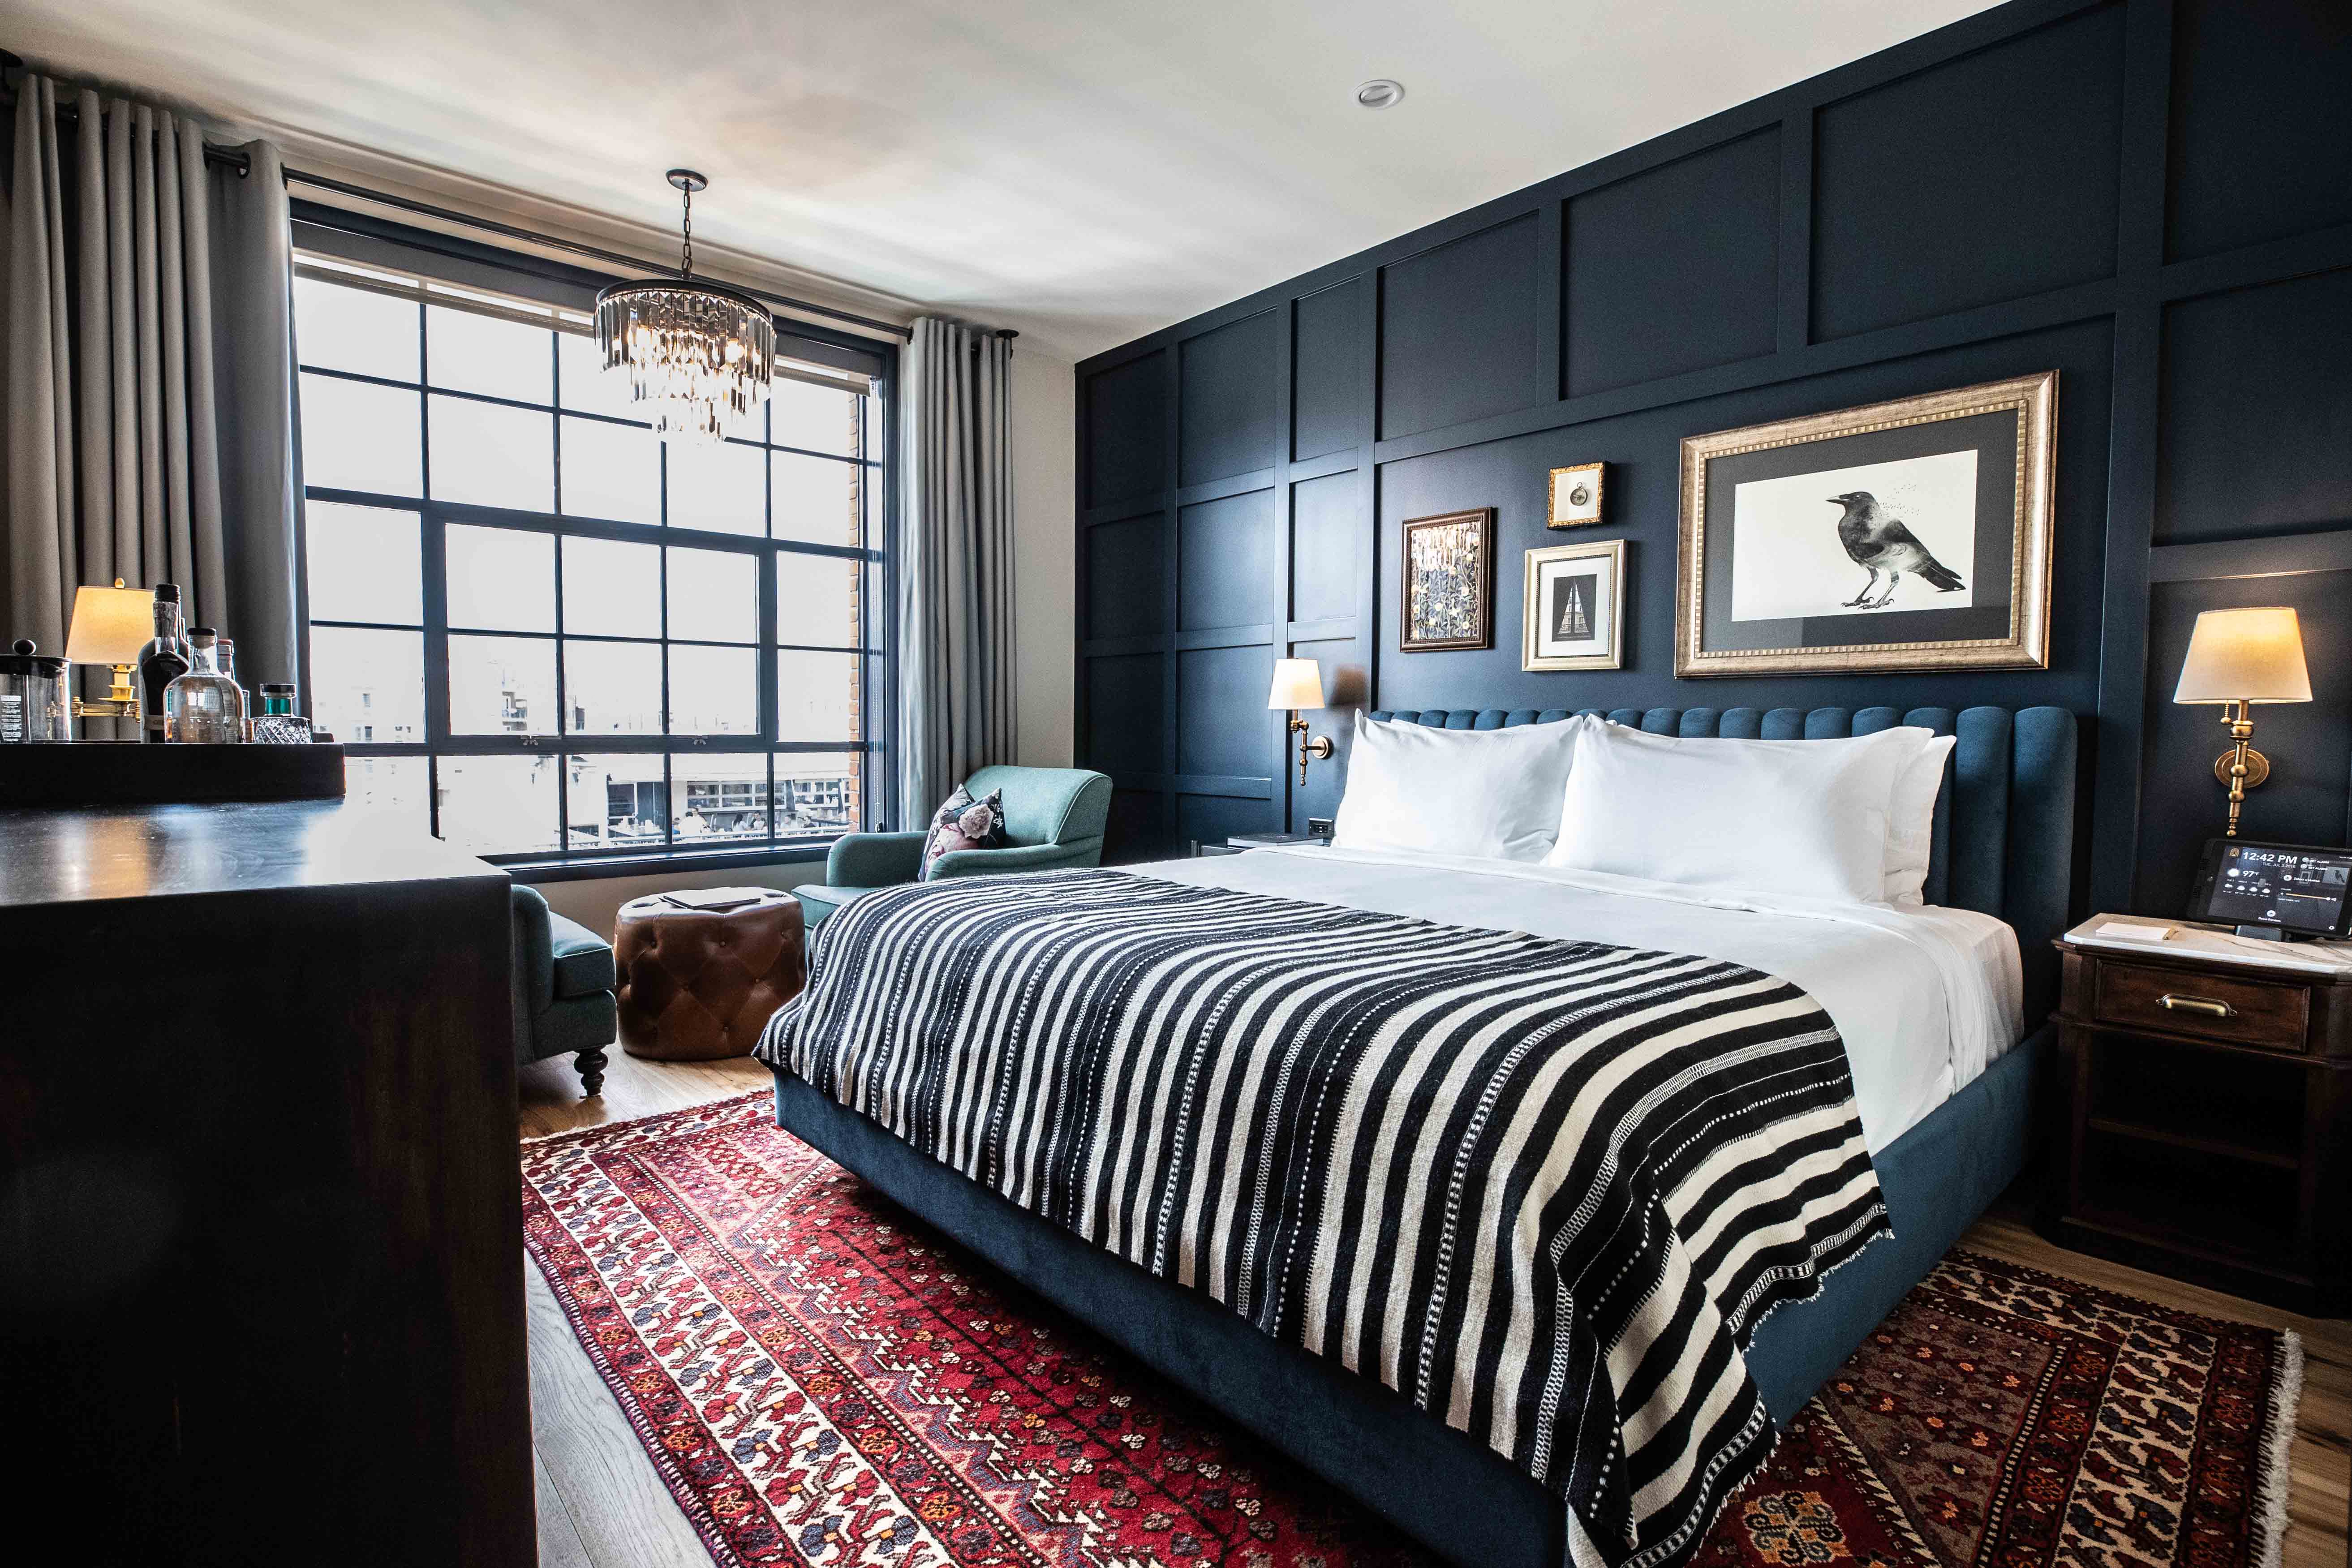 The Ramble is a boutique hotel with 50 inviting rooms